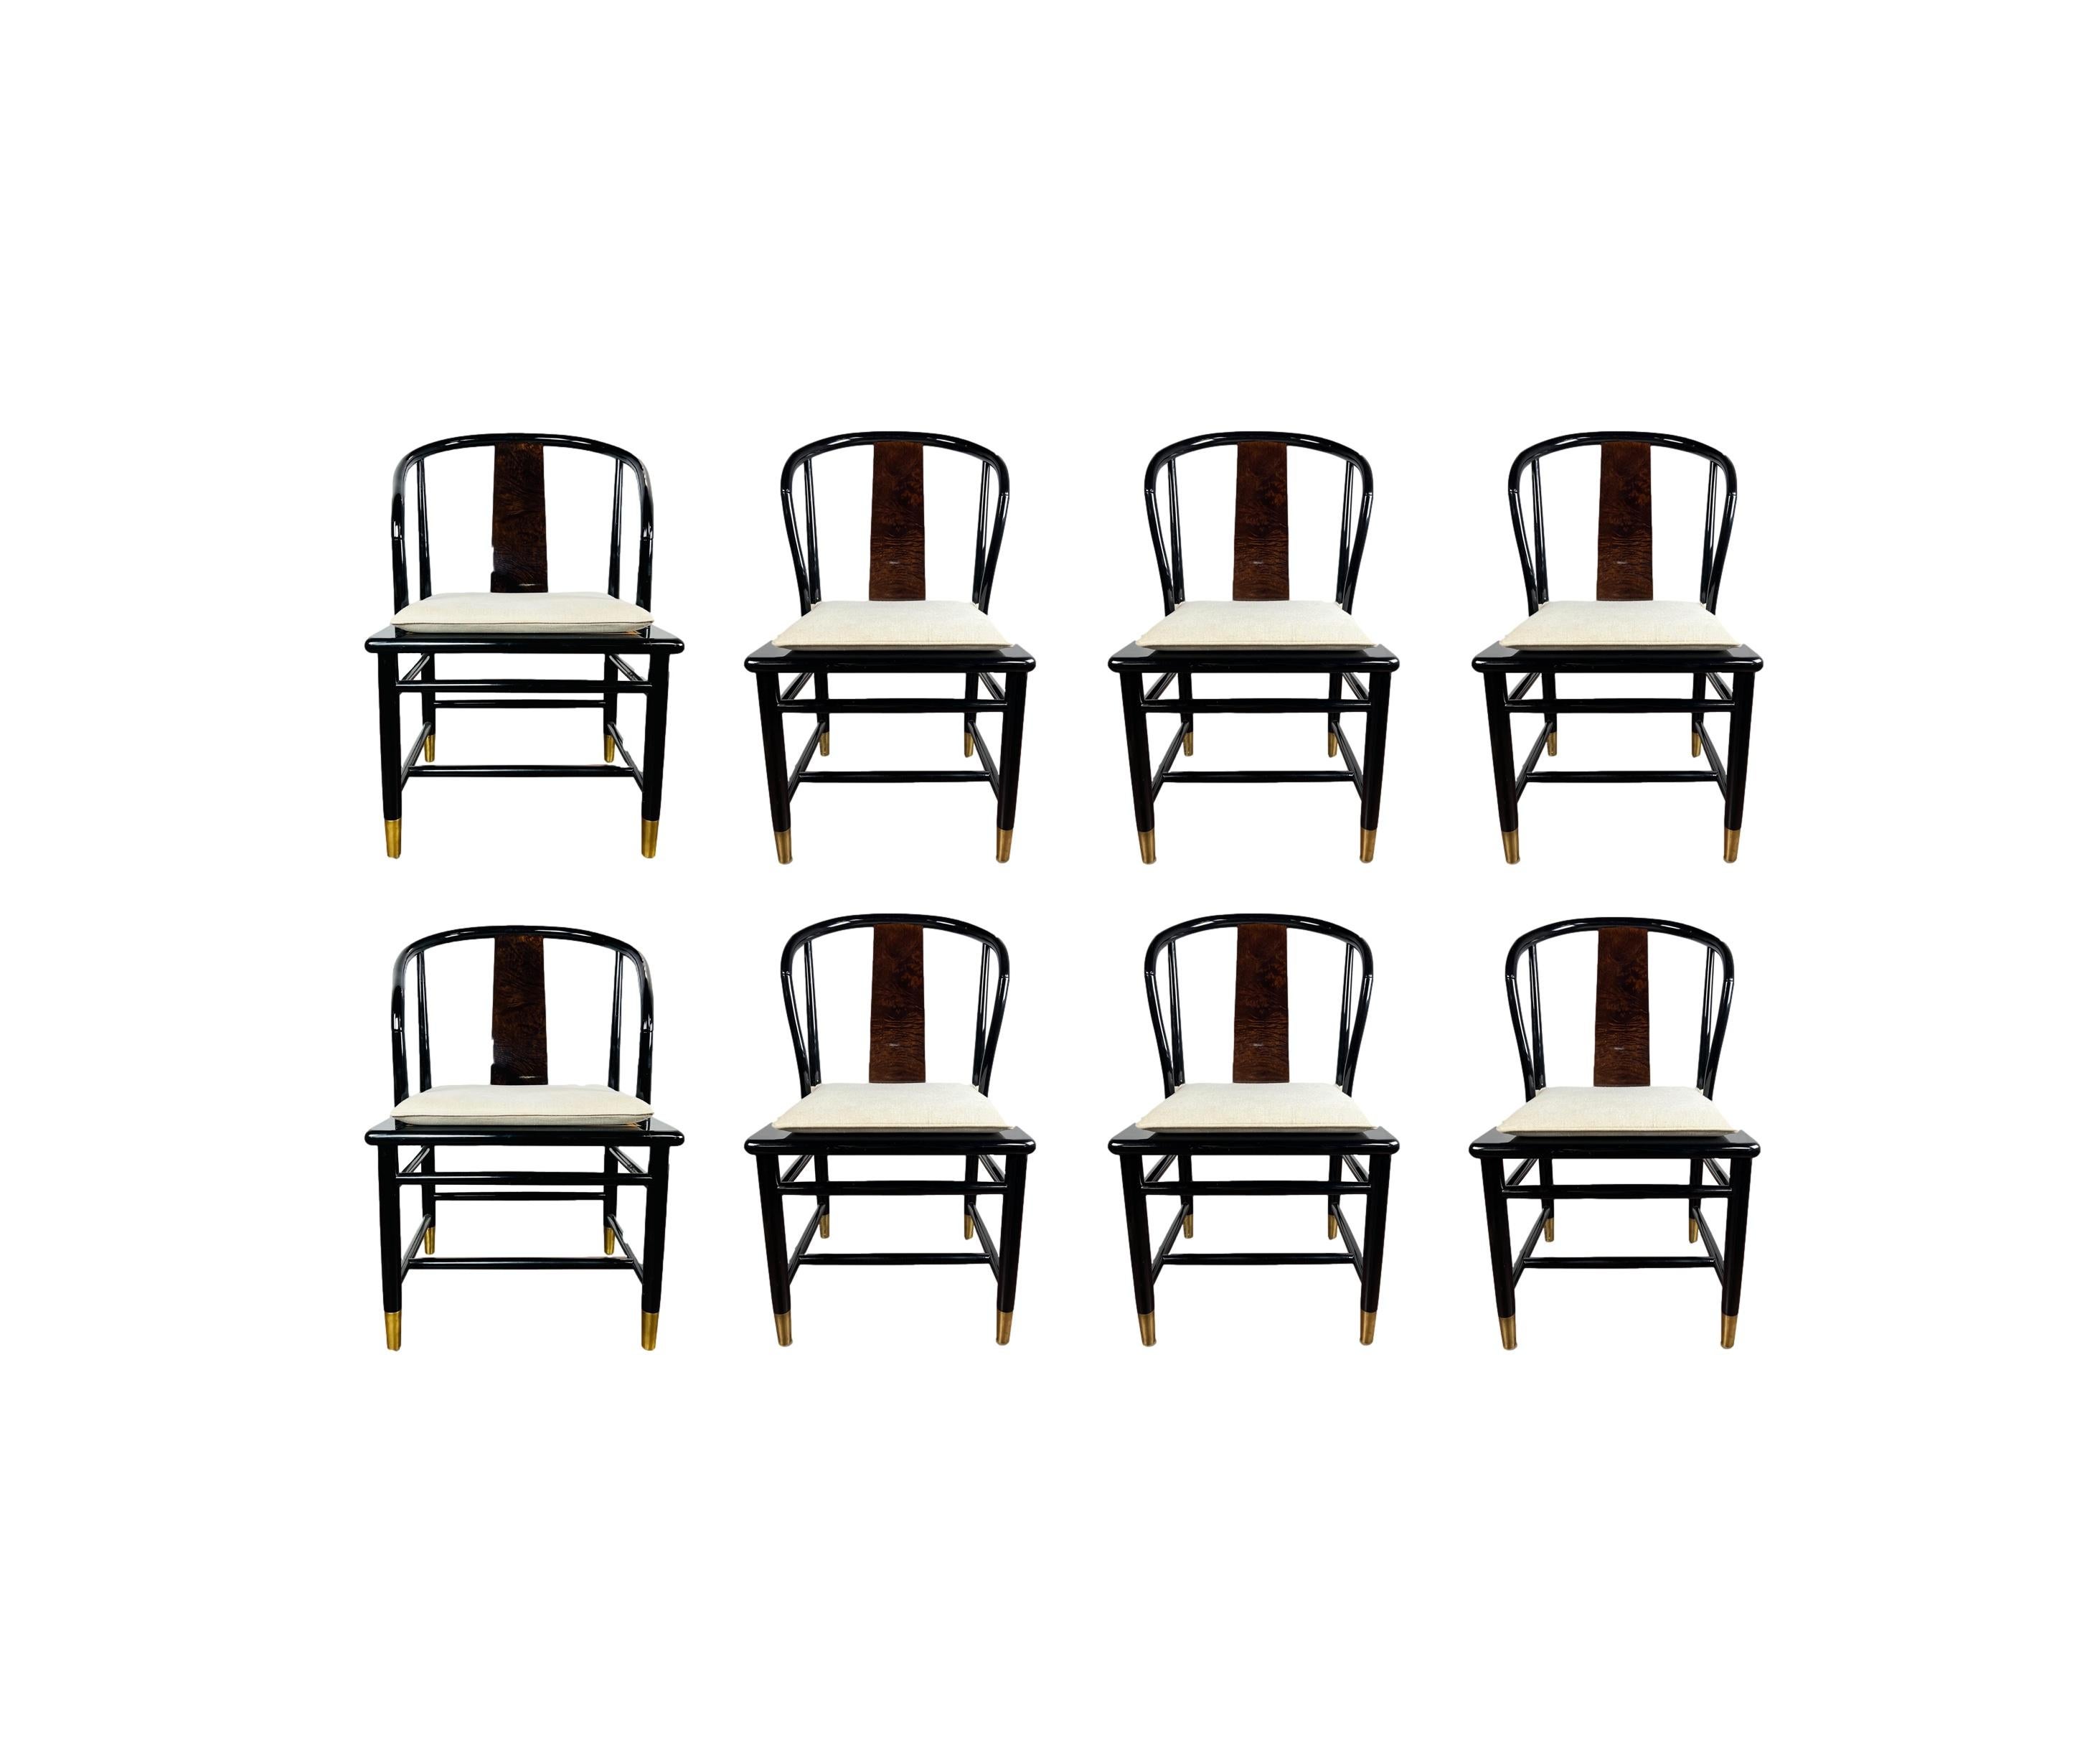 Set of 8 Henredon Scene Three dining chairs. These Asian influenced dining chairs feature glossy black lacquer frames with supportive undulating burledwood back with a natural caned seat (removable cushions included). The chairs finish in